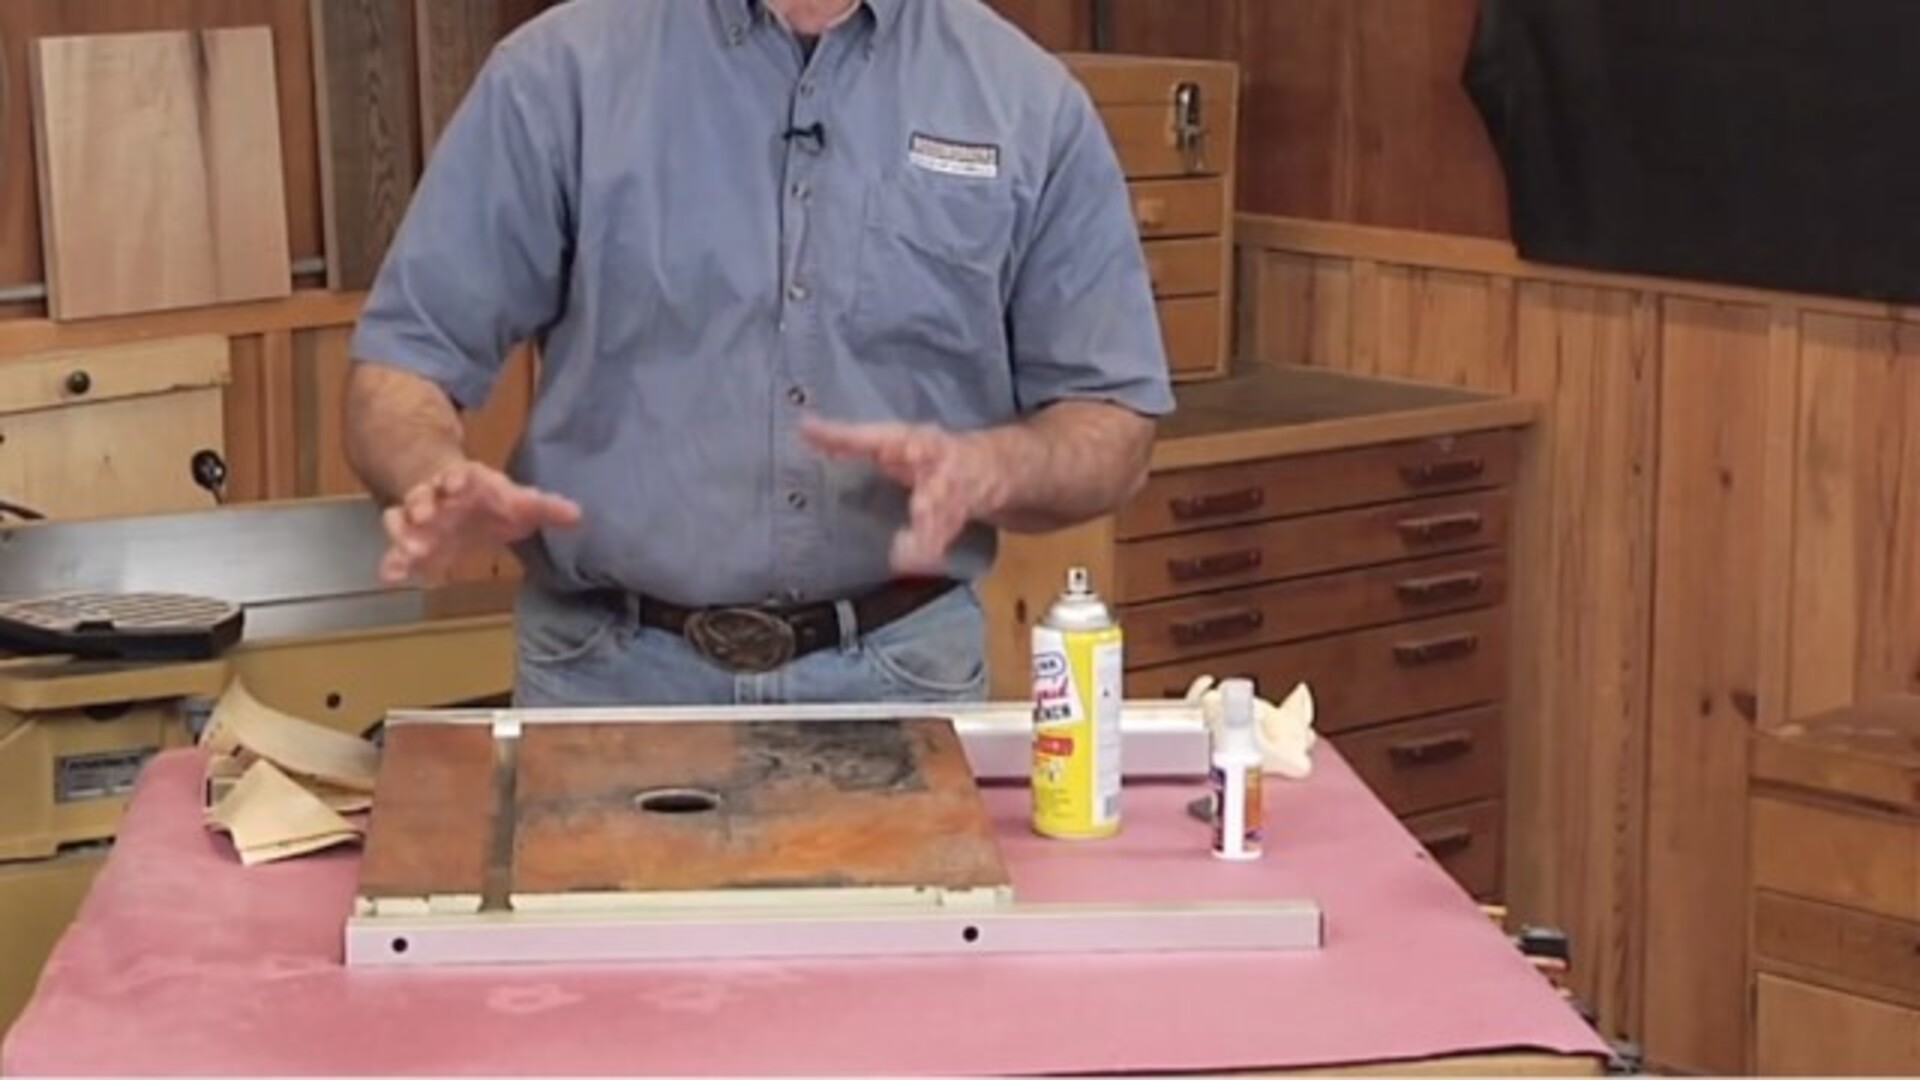 Waxing Cast Iron Table Saw top